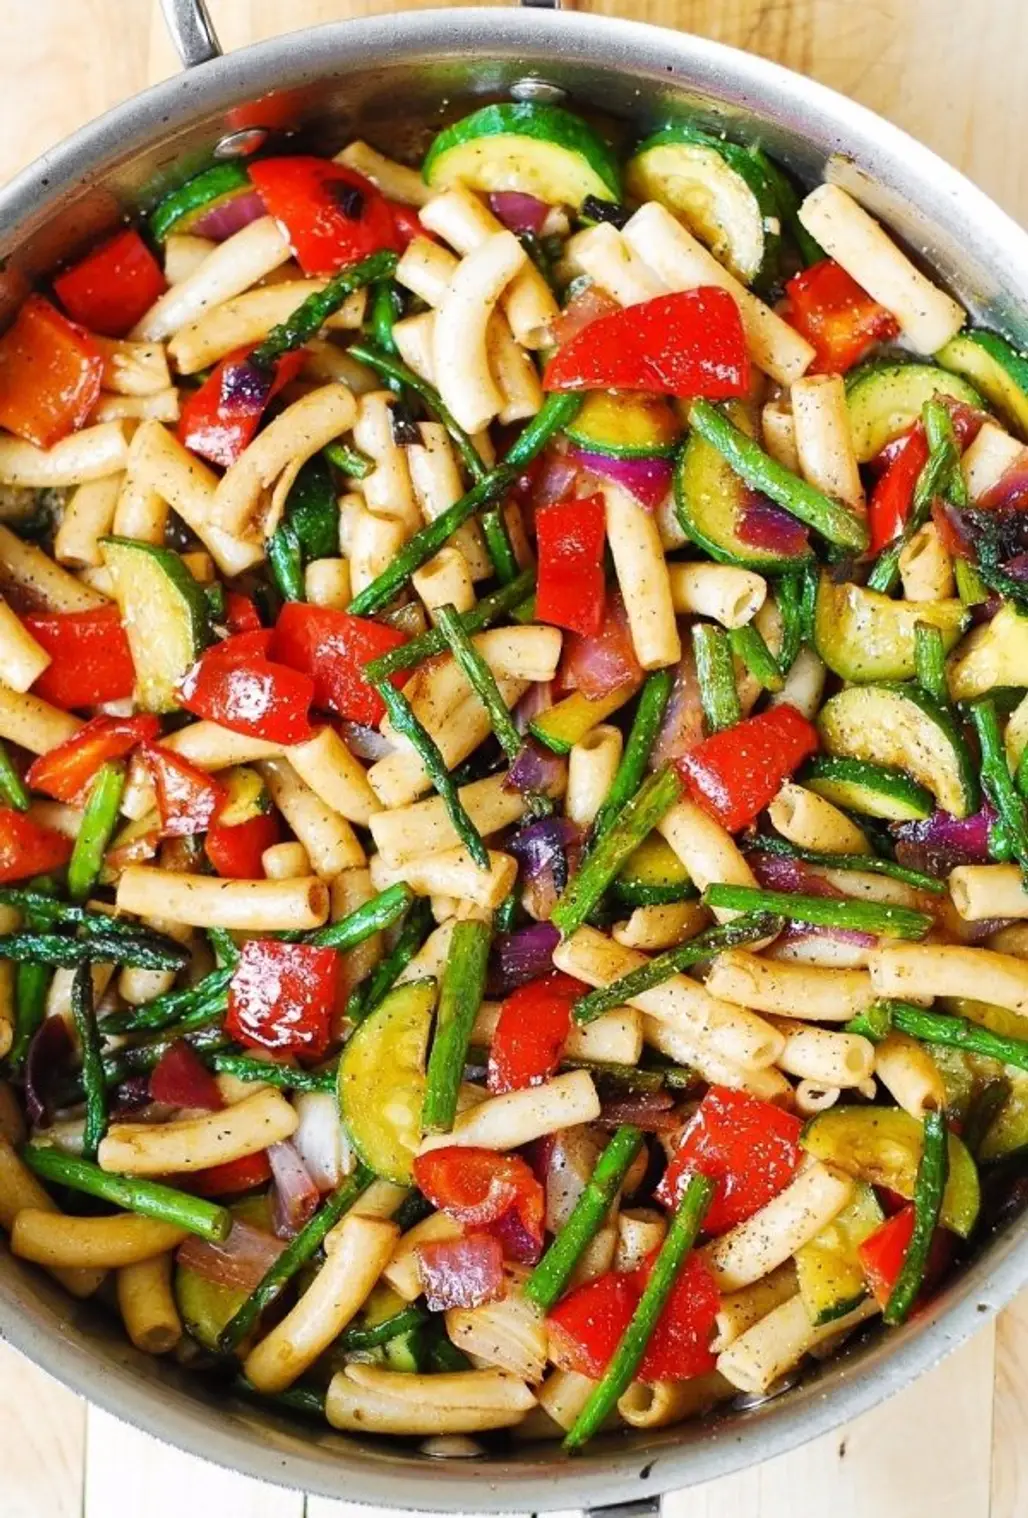 Healthy Pasta Salad with Roasted Vegetables